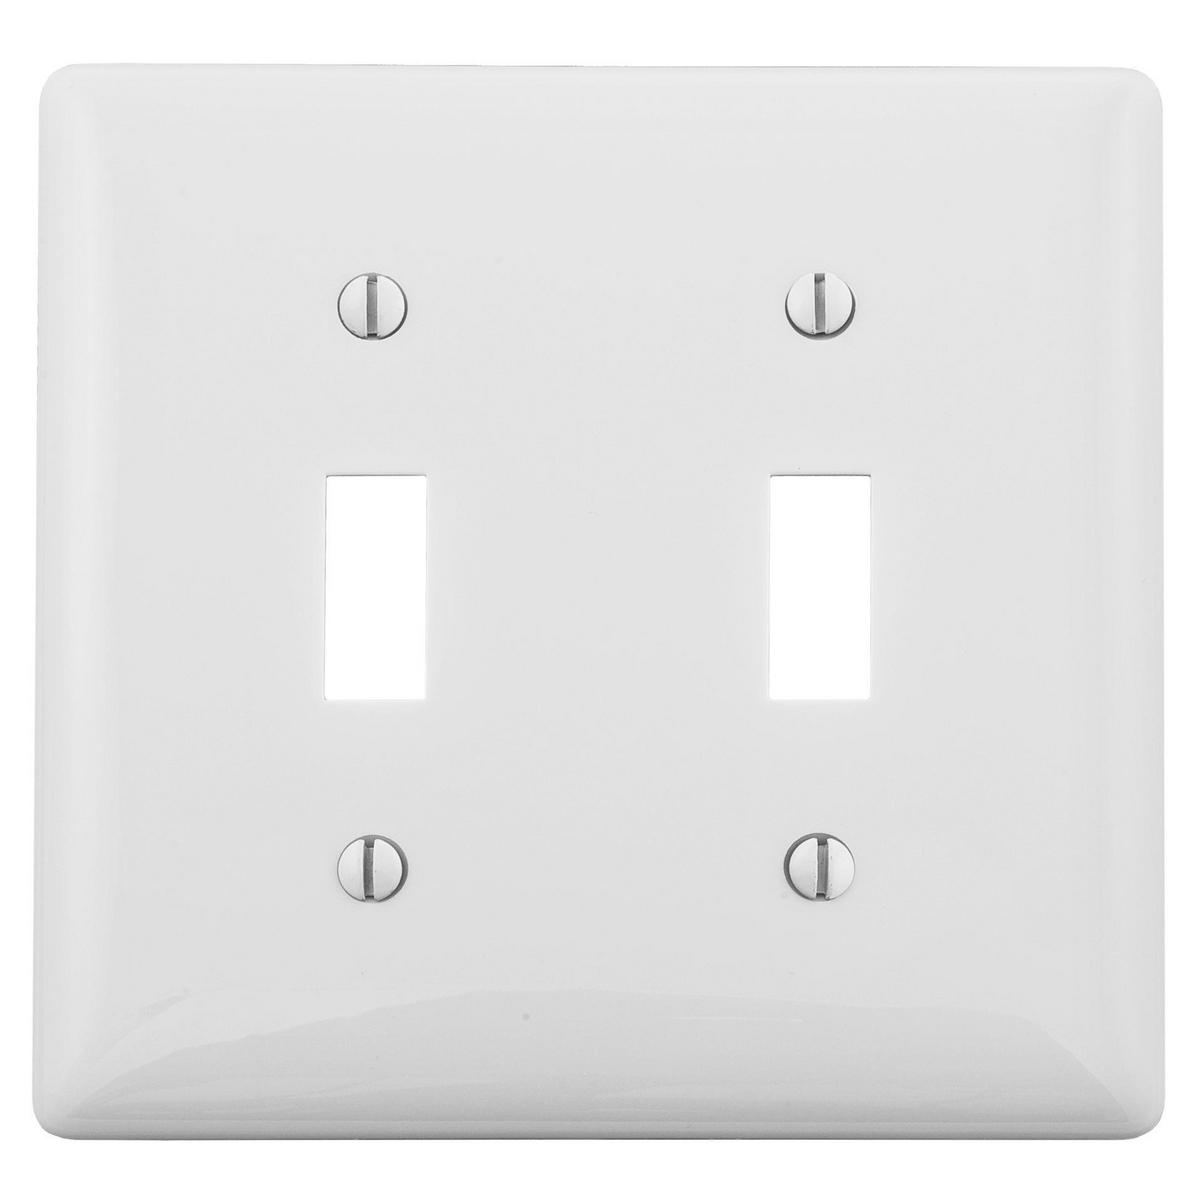 Hubbell NPJ2W Wallplates and Box Covers, Wallplate, Nylon, Mid-Sized, 2-Gang, 2) Toggle, White  ; Reinforcement ribs for extra strength ; Captive screw feature holds mounting screw in place ; High-impact, self-extinguishing nylon material ; Smooth, easy to clean finish